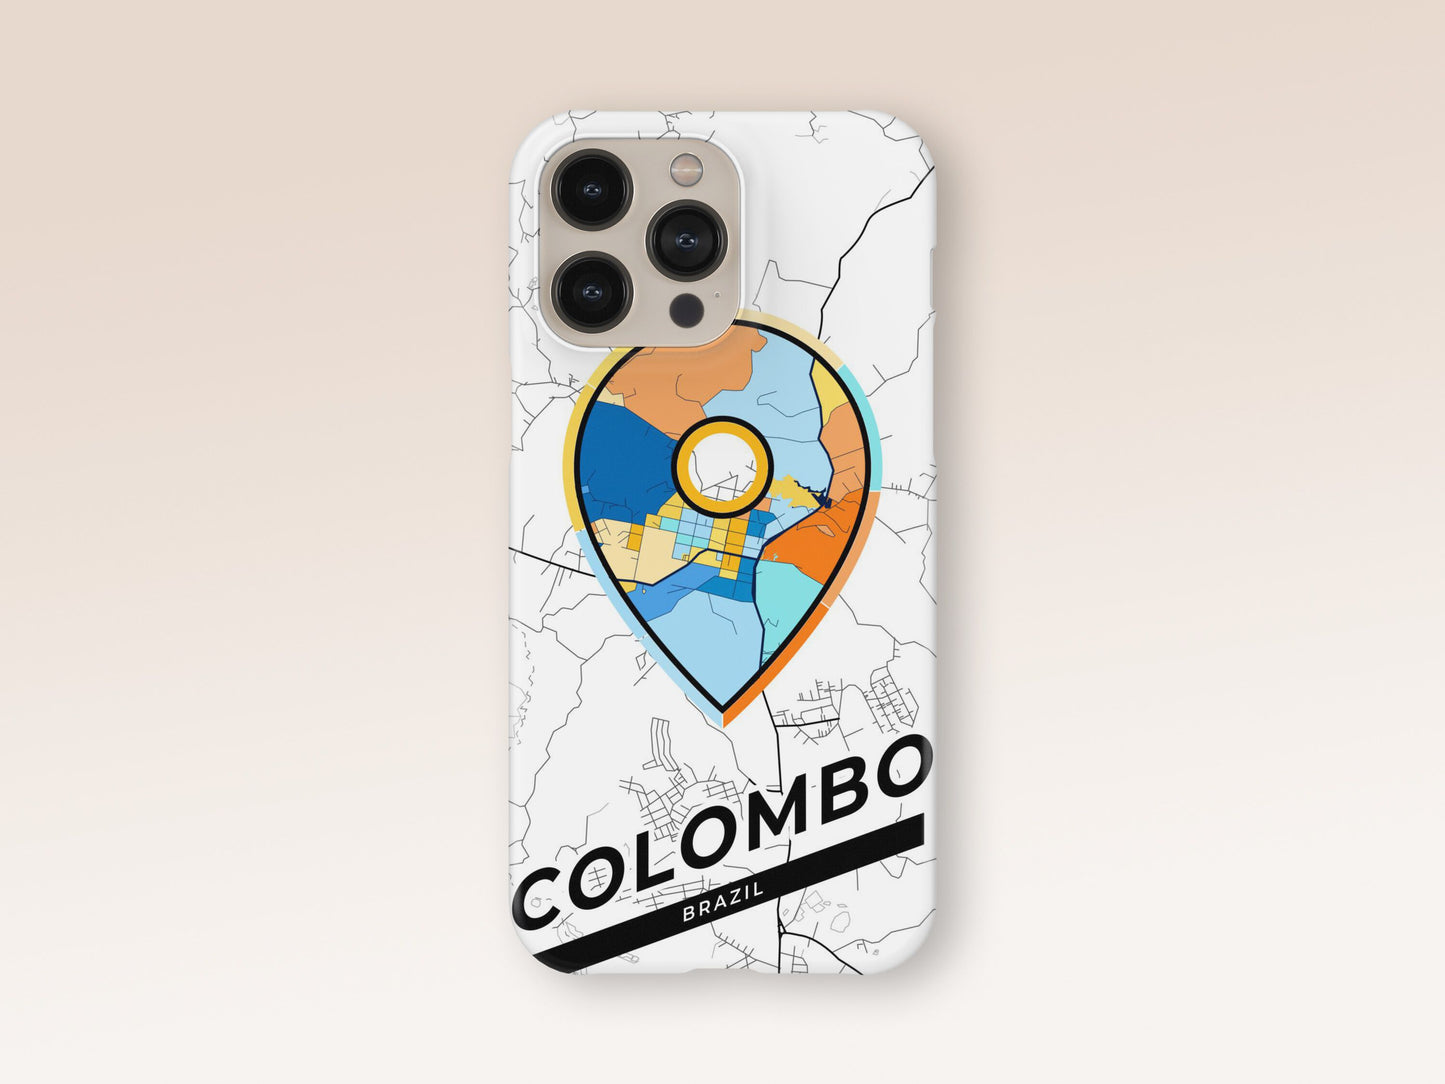 Colombo Brazil slim phone case with colorful icon. Birthday, wedding or housewarming gift. Couple match cases. 1